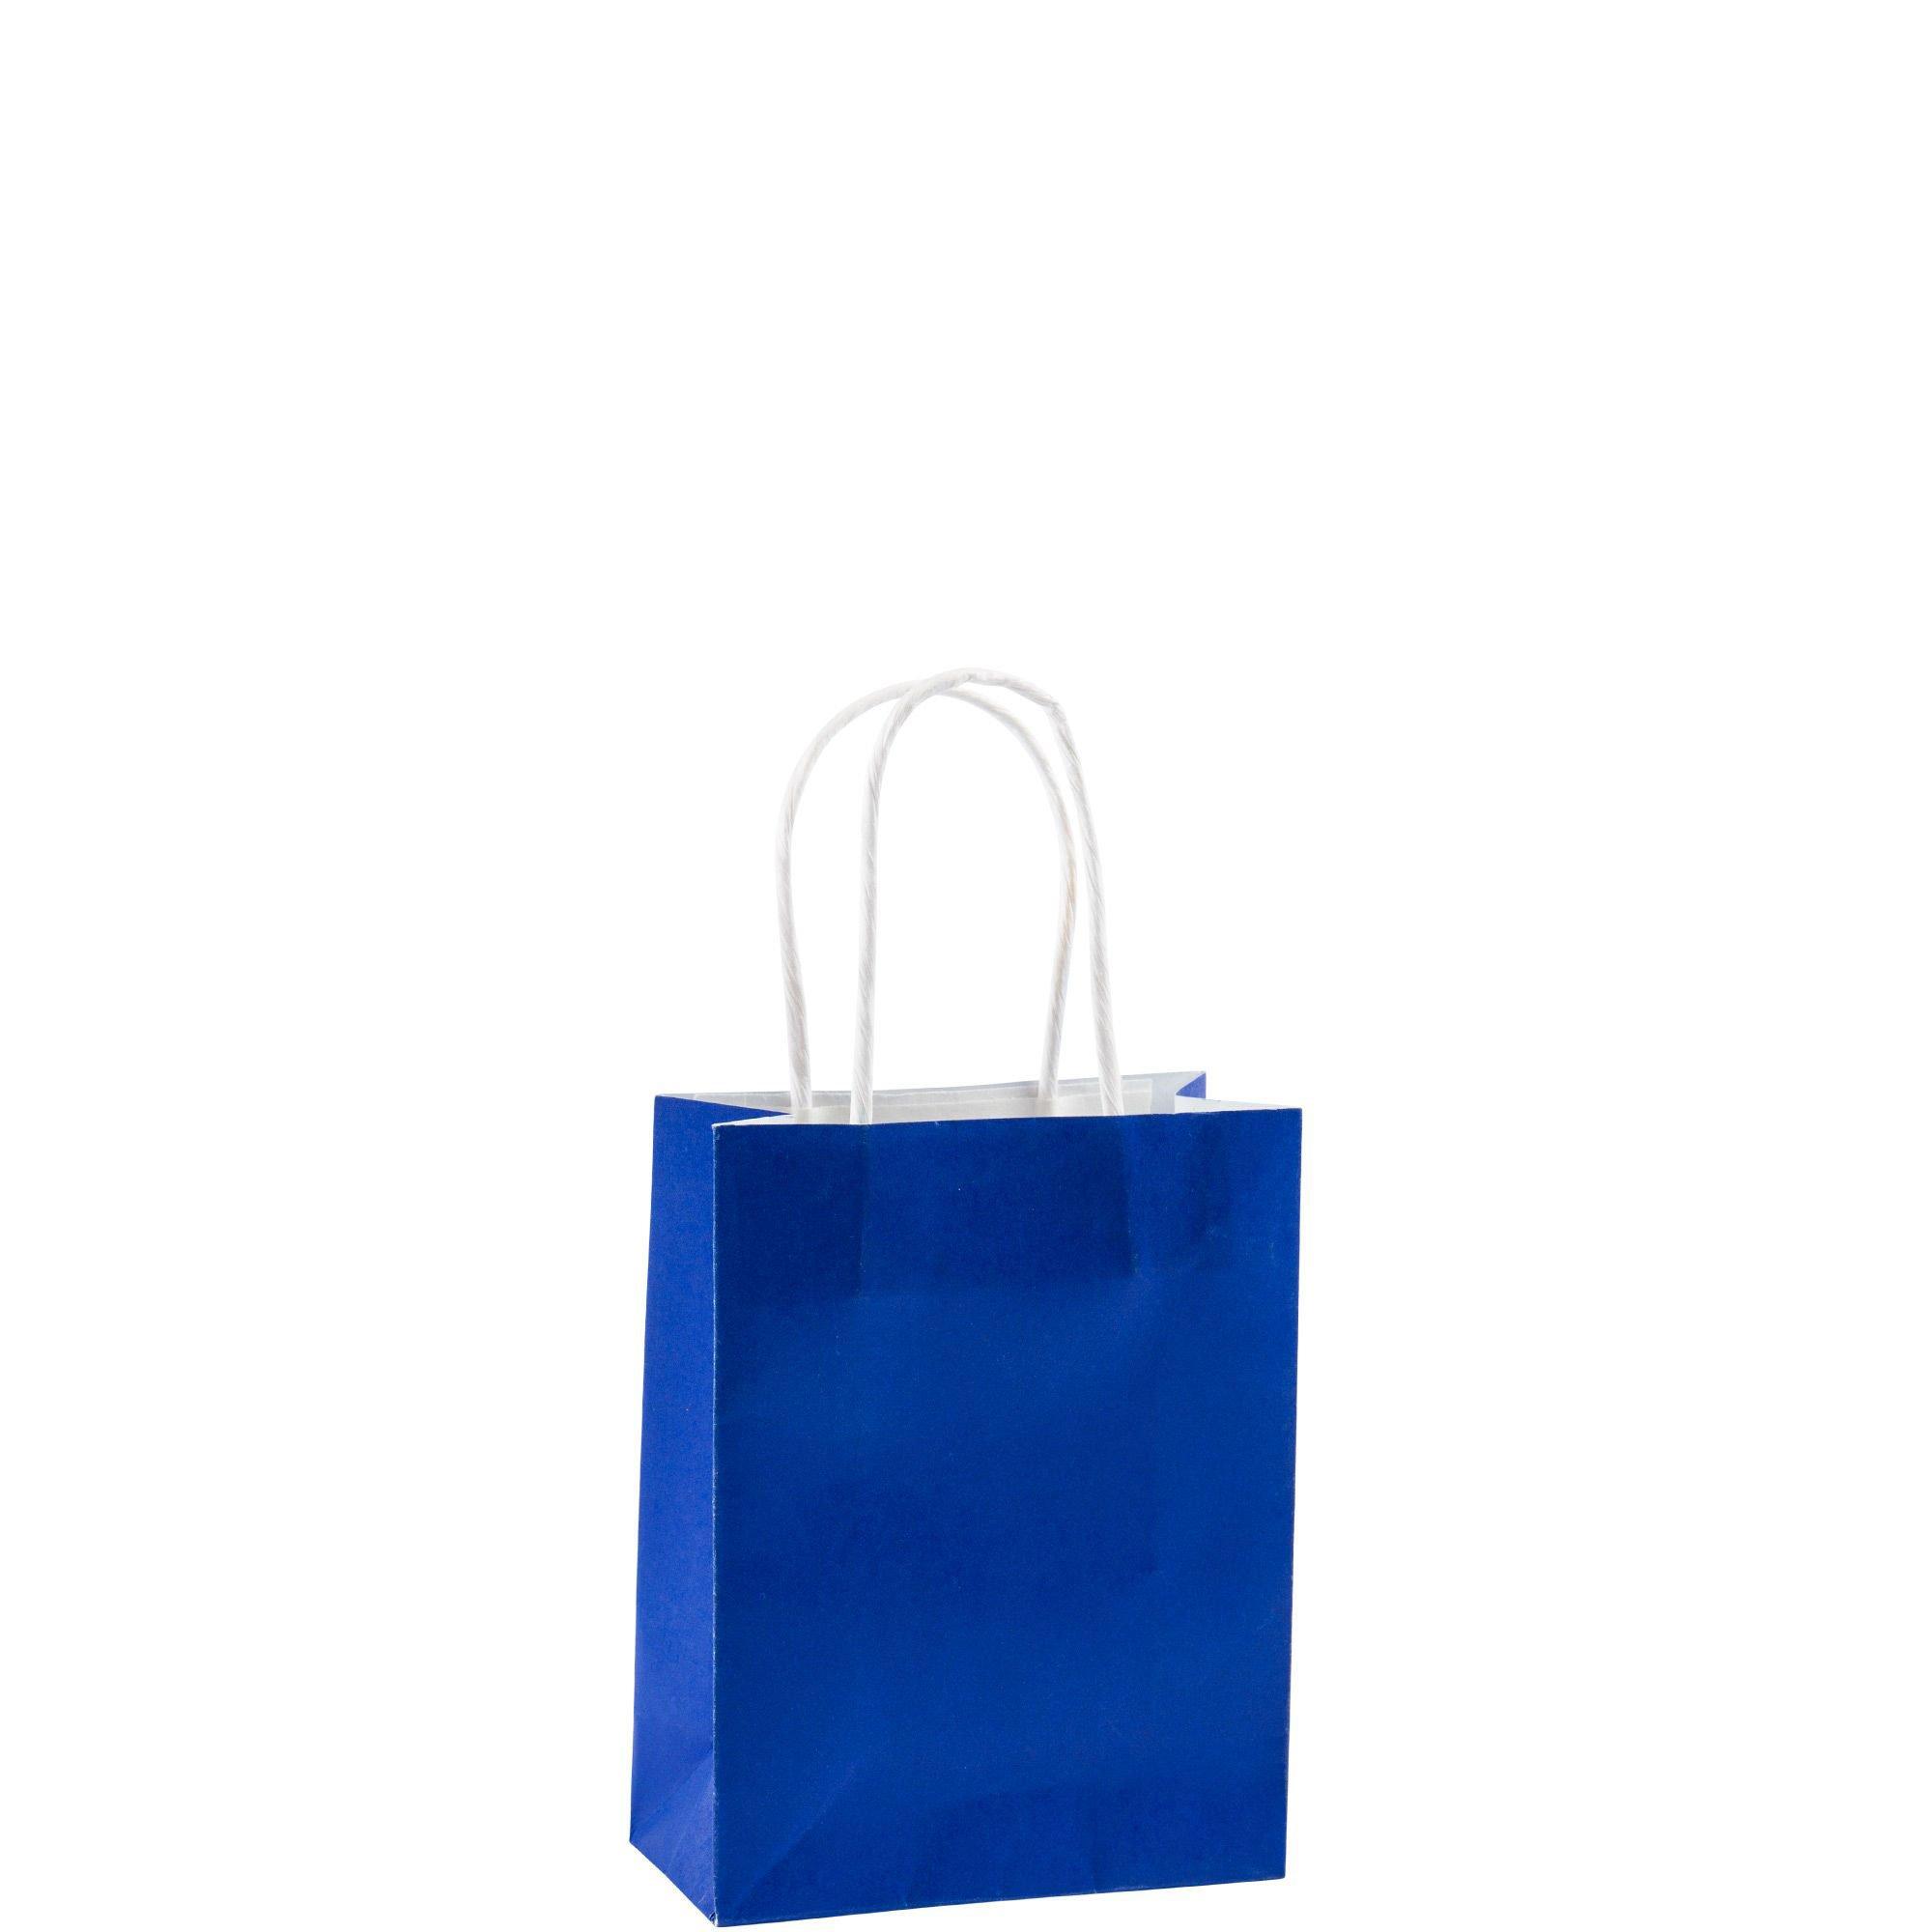 Handled Rich Electric Blue Colored Fancy Paper Bag, For Gifting